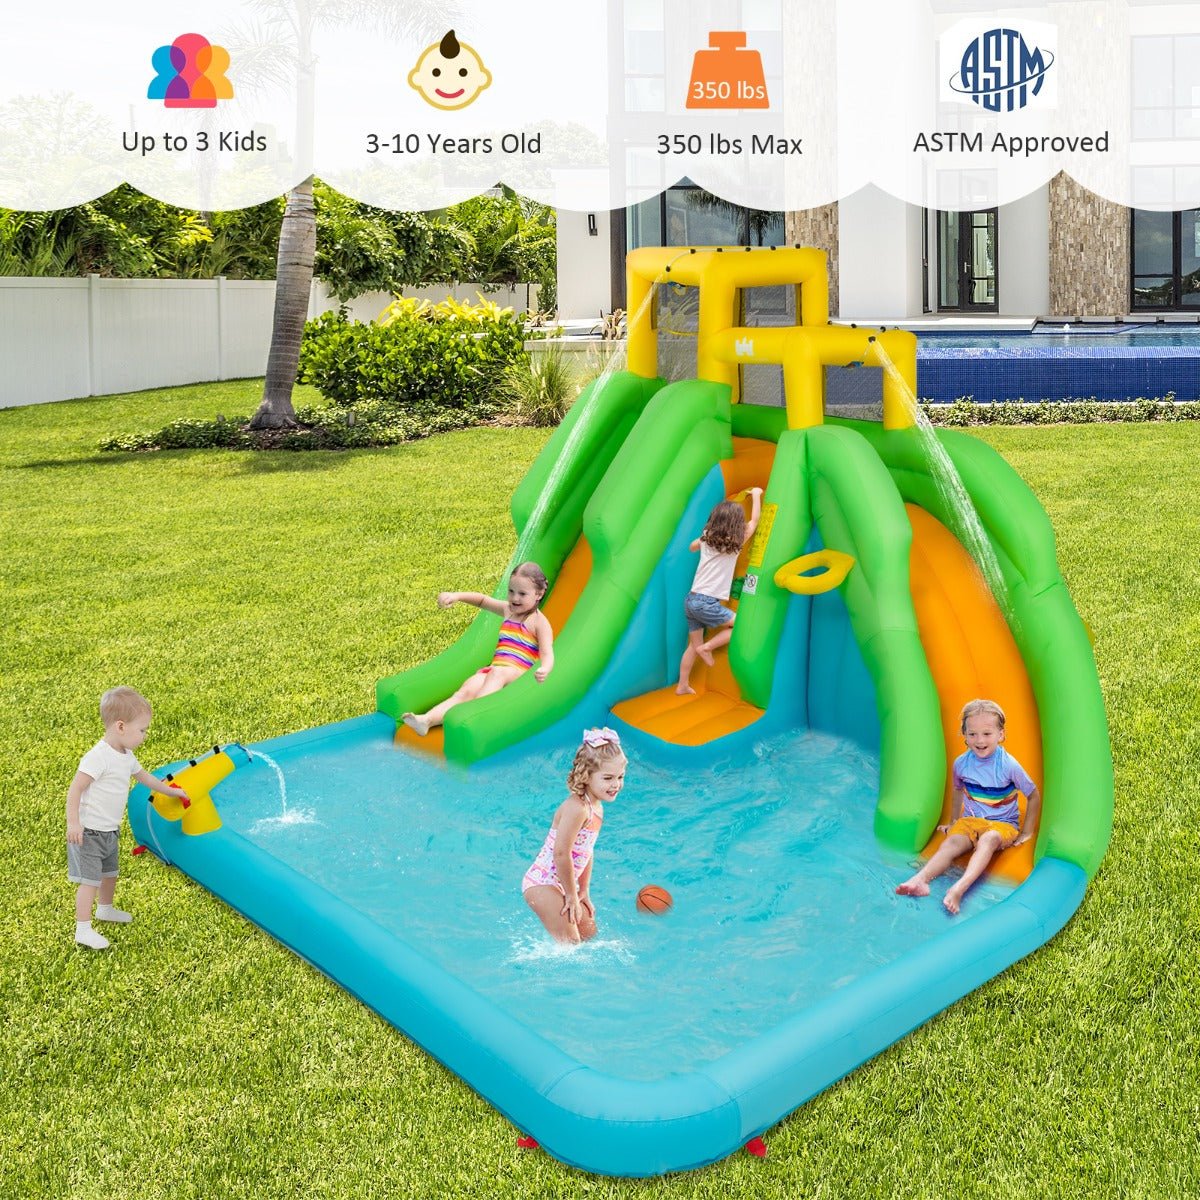 Enjoy Splashes and Slides with the Inflatable Water Park - Shop Today!